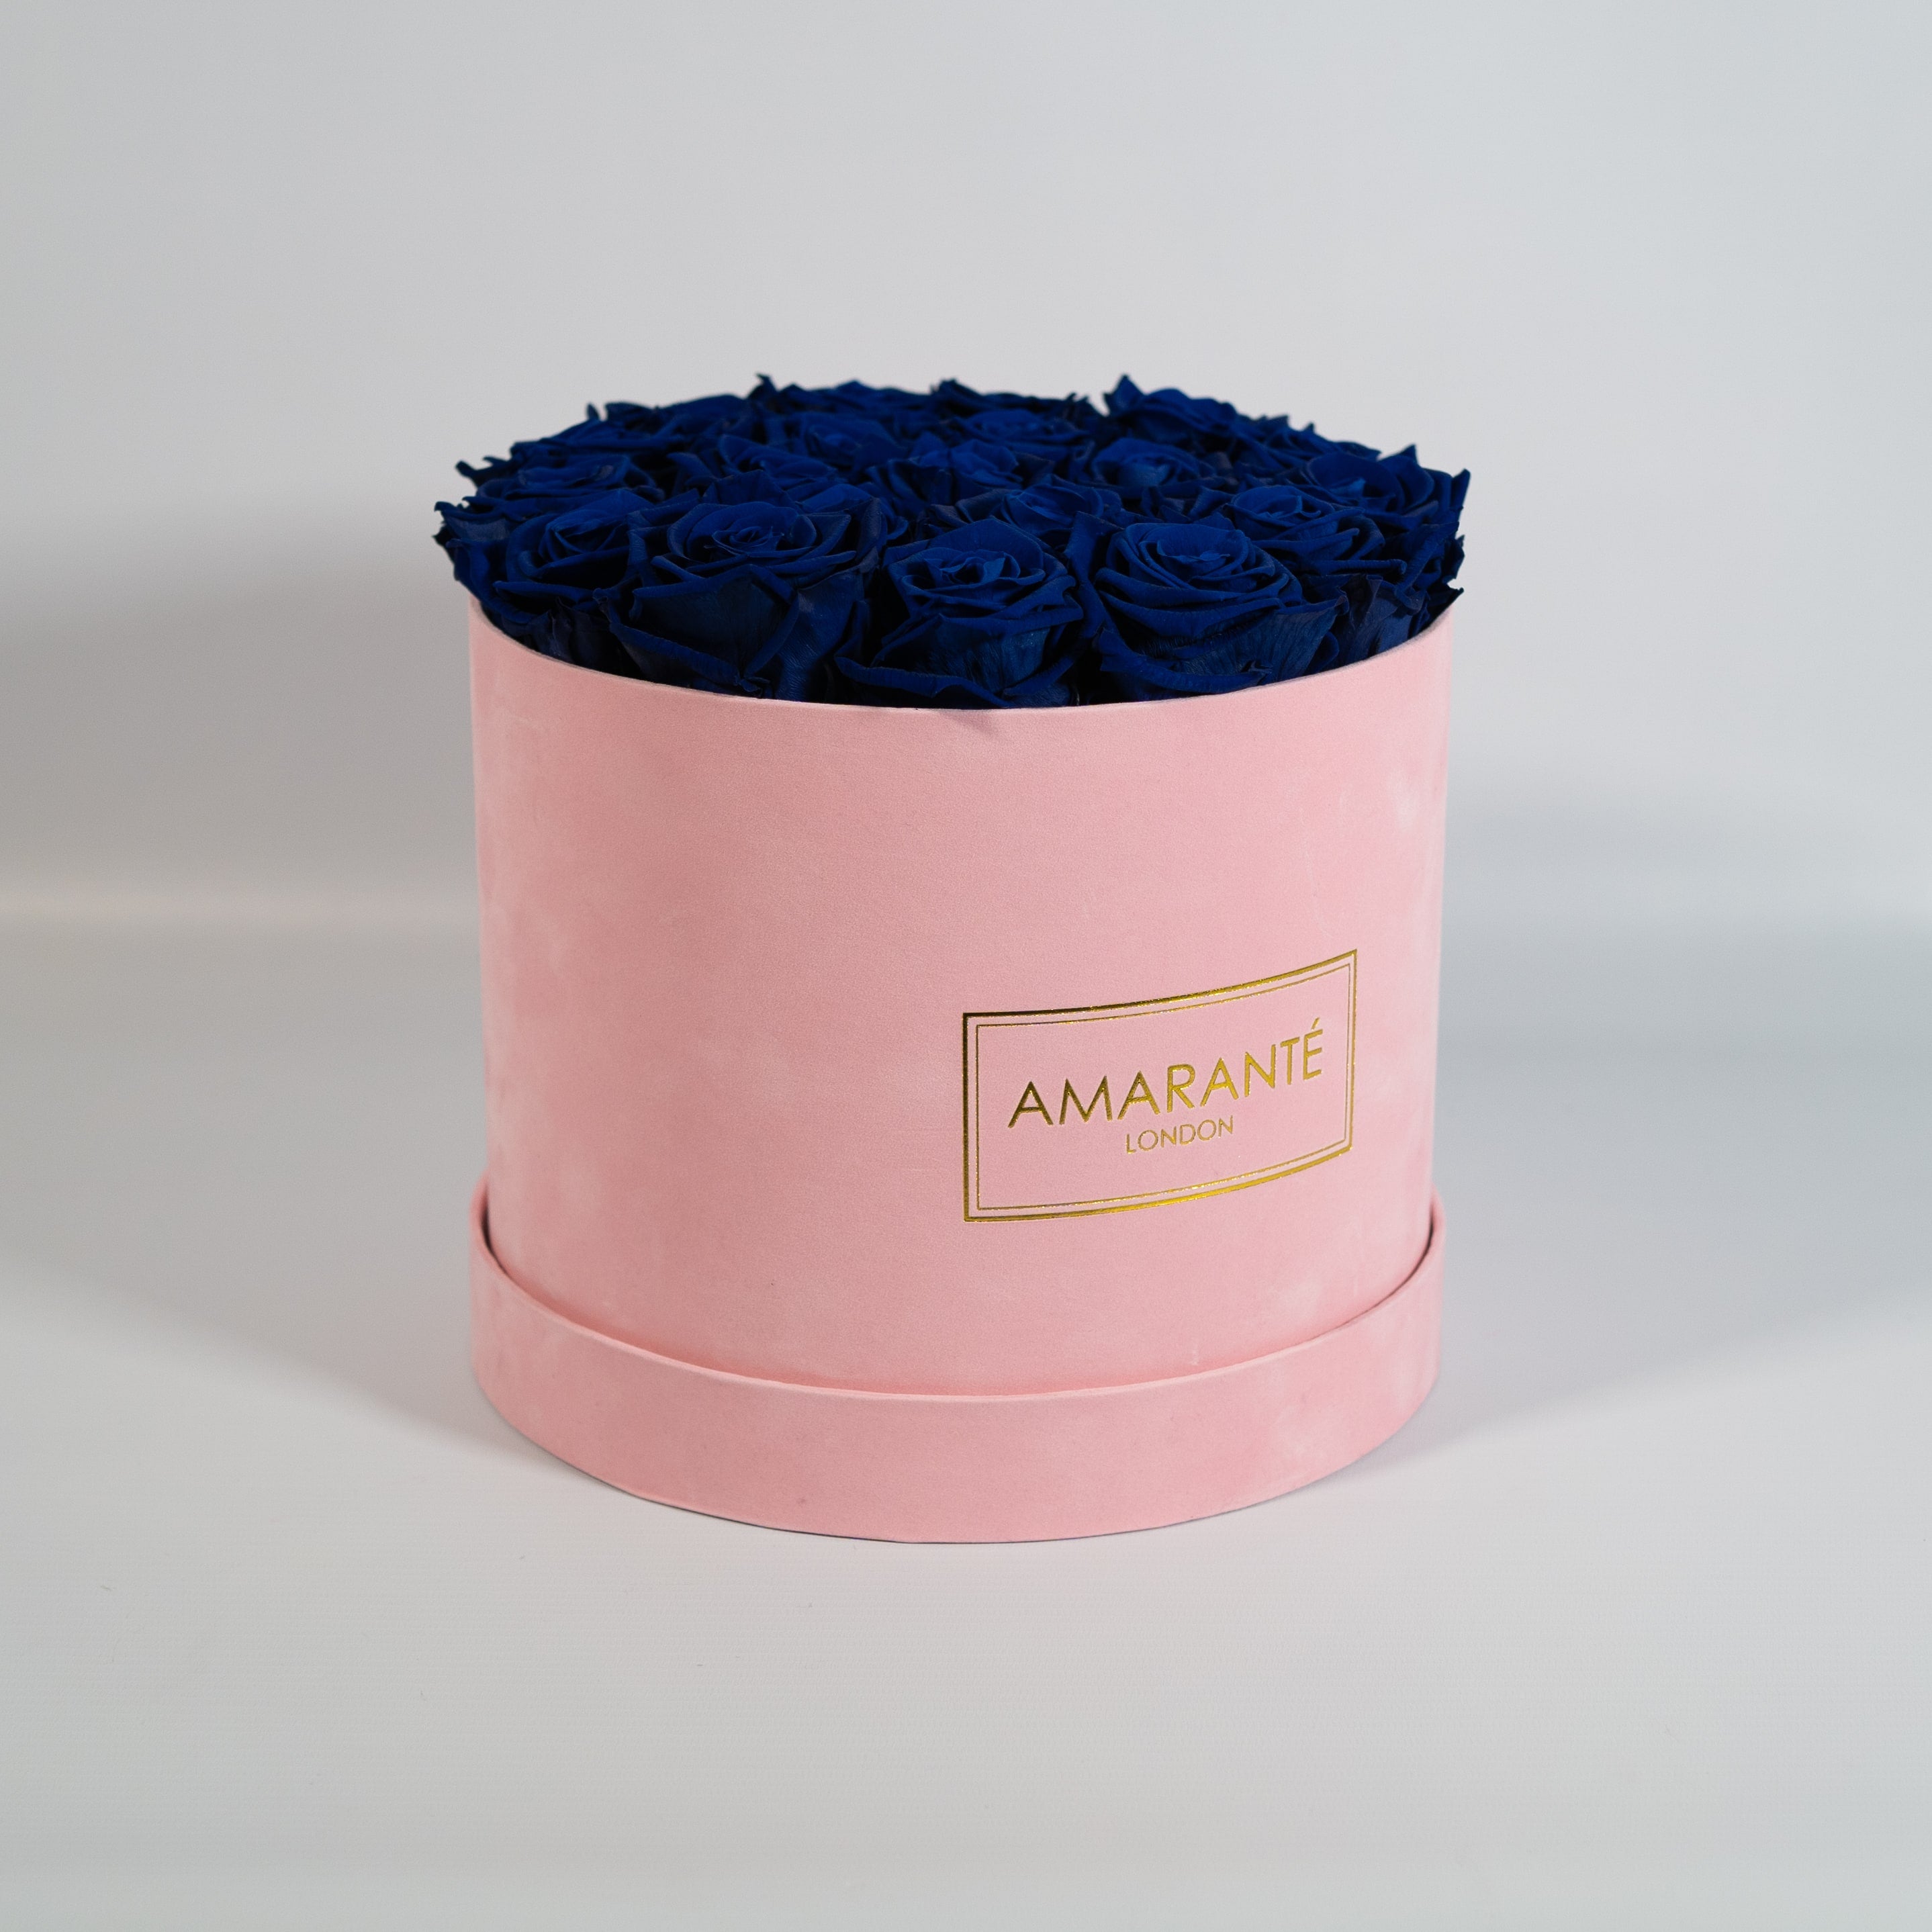 Dapper royal blue Roses in a chic pink box 